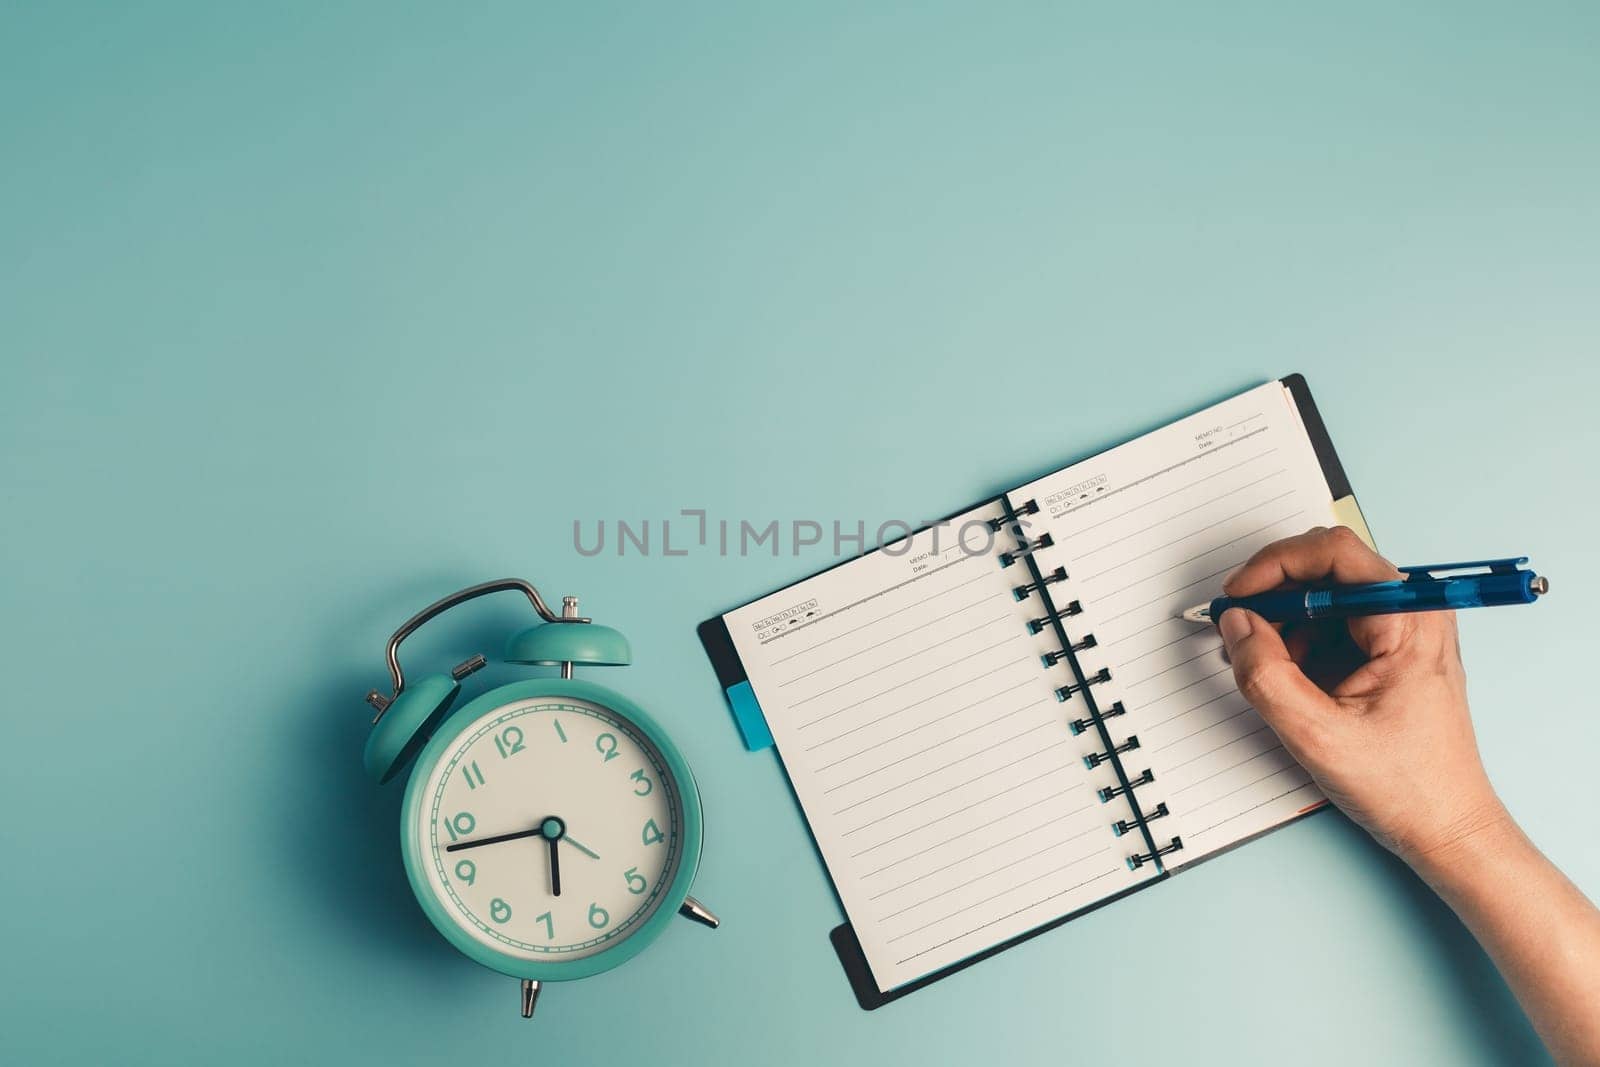 Hand writing on a dairy notebook with an alarm clock on blue background for the concept of work, study and time management.